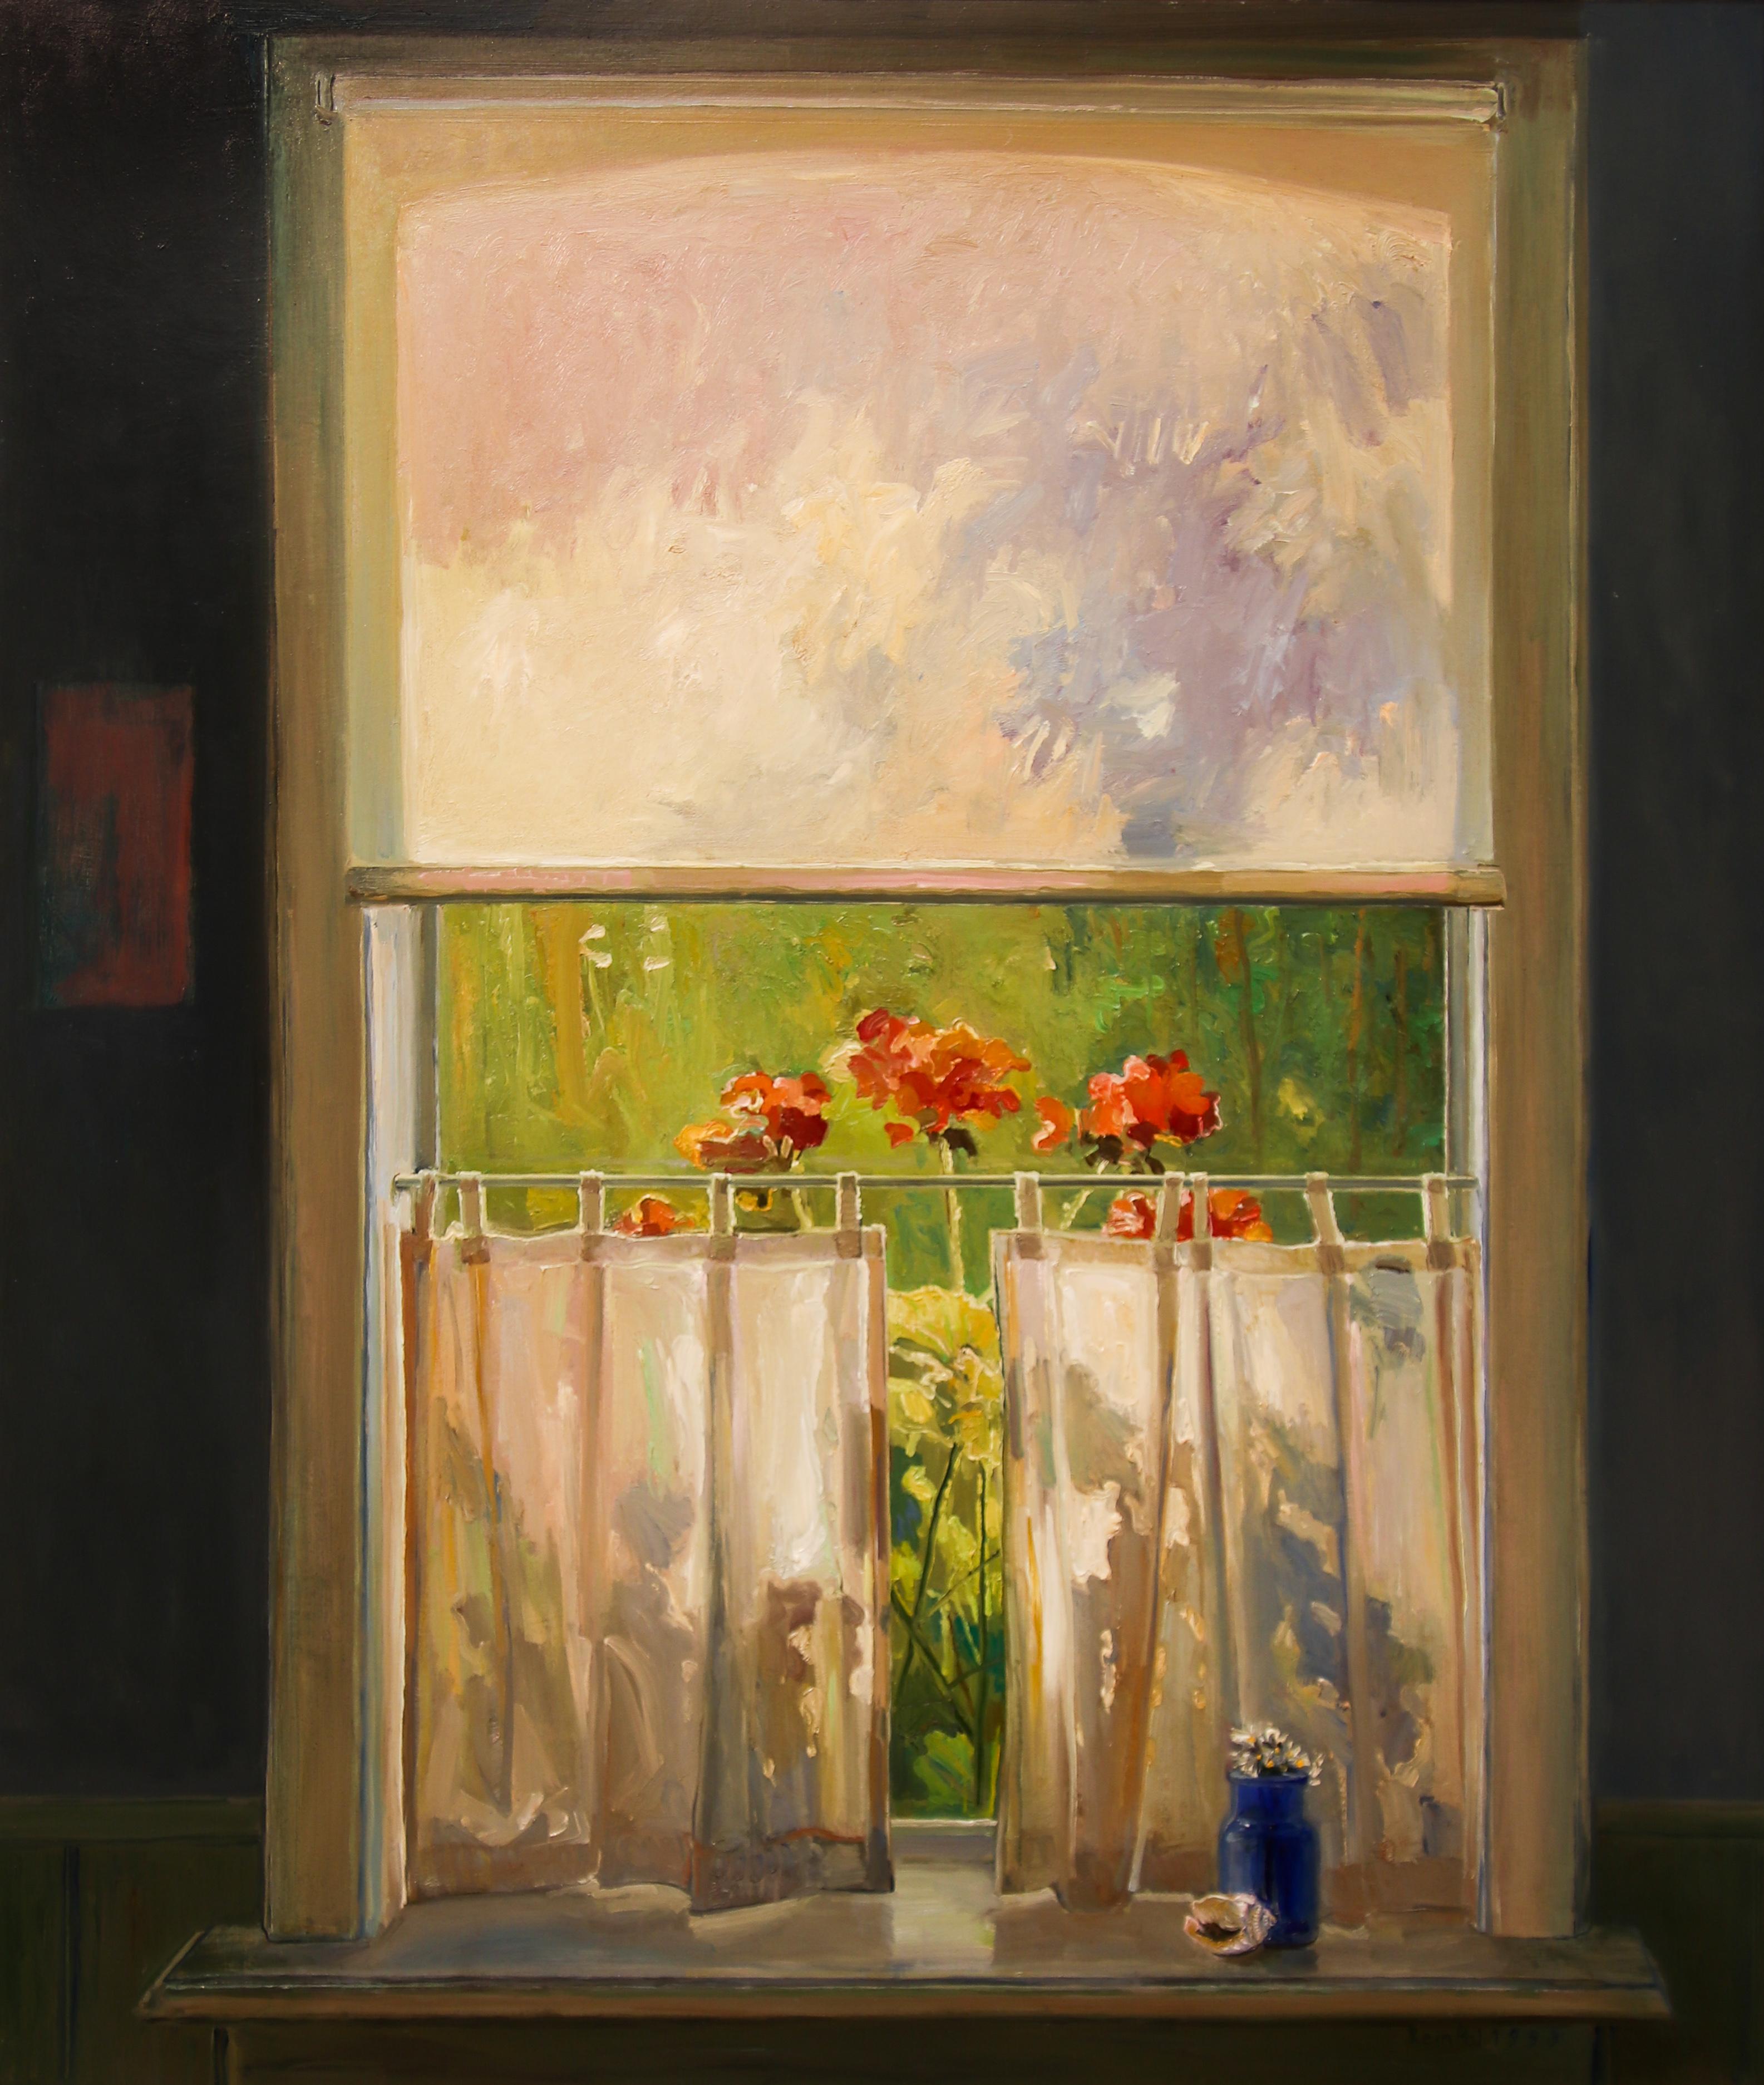 Rein Pol Figurative Painting - Blue Vase In Window Lighting - 21st Century Contemporary Dutch Oil Painting 